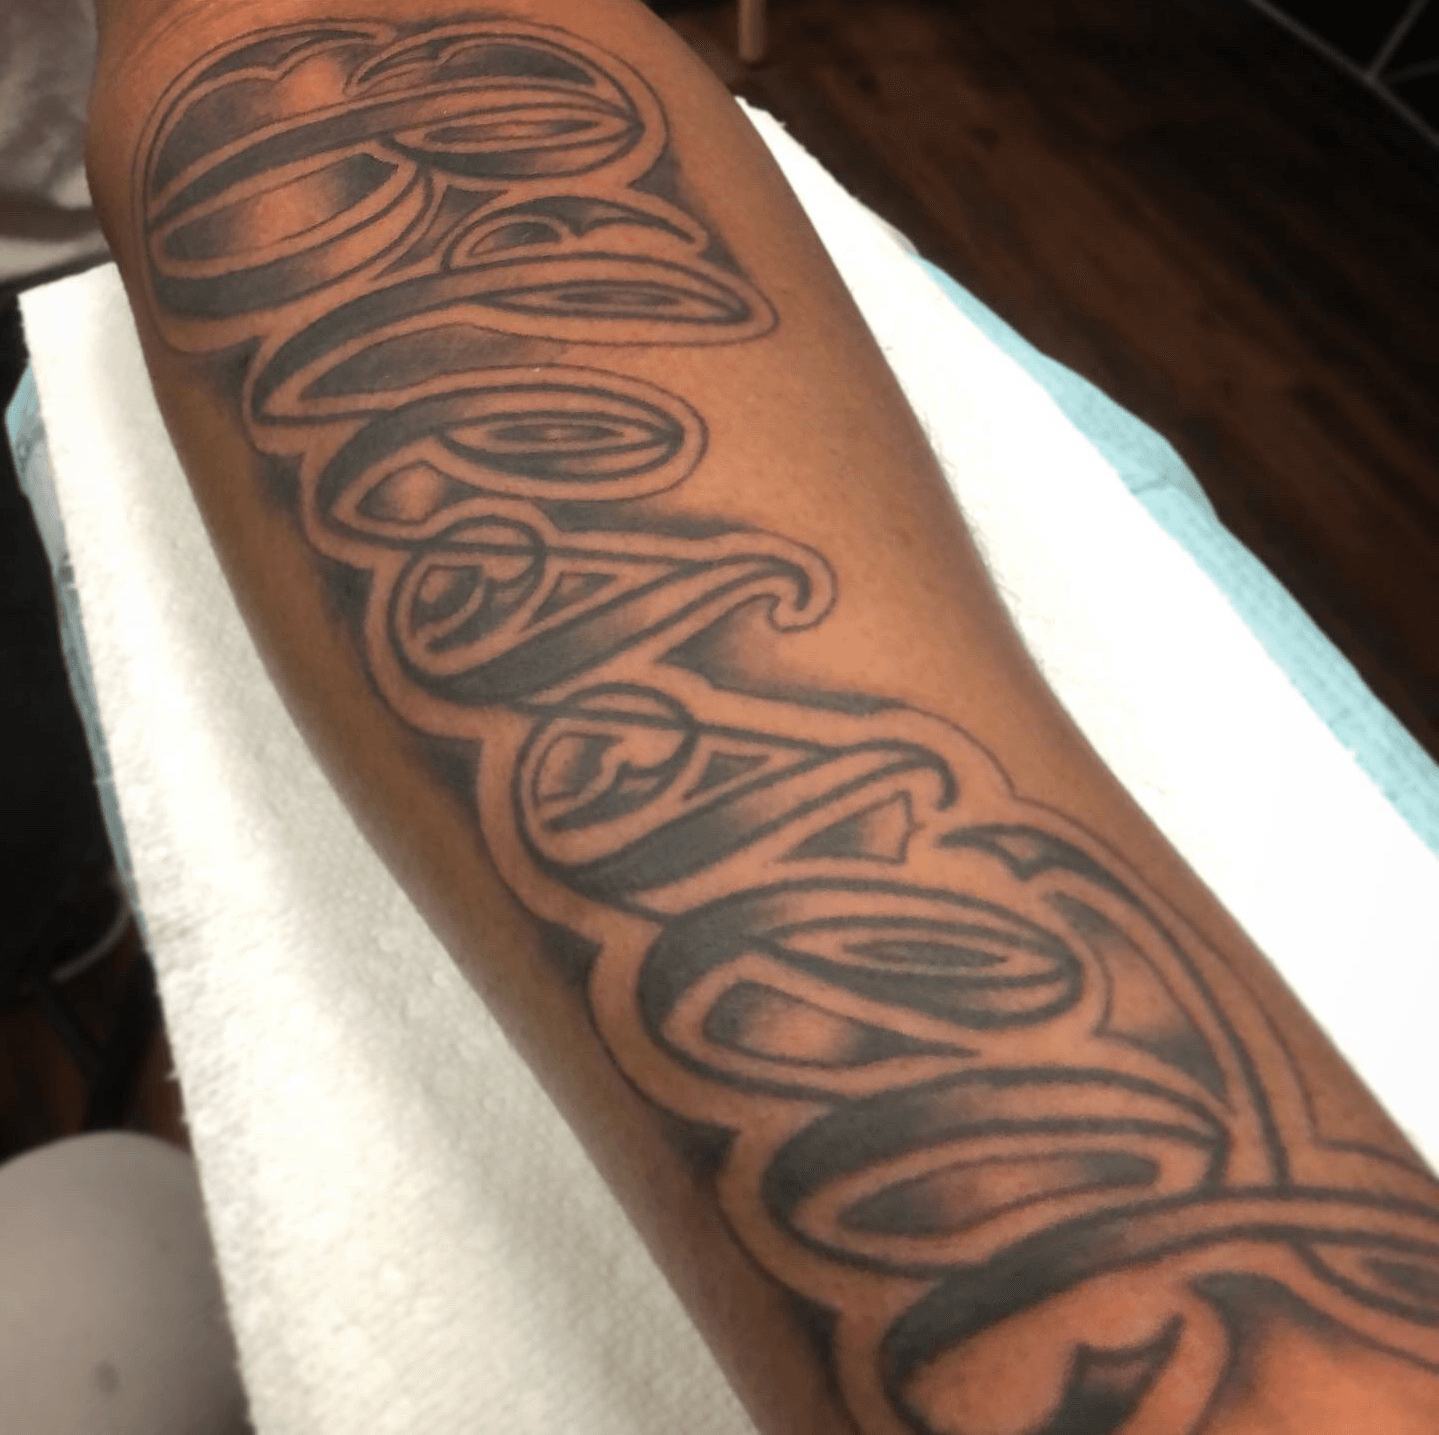 Keep it simple and make no mistake with blessed forearm tattoo